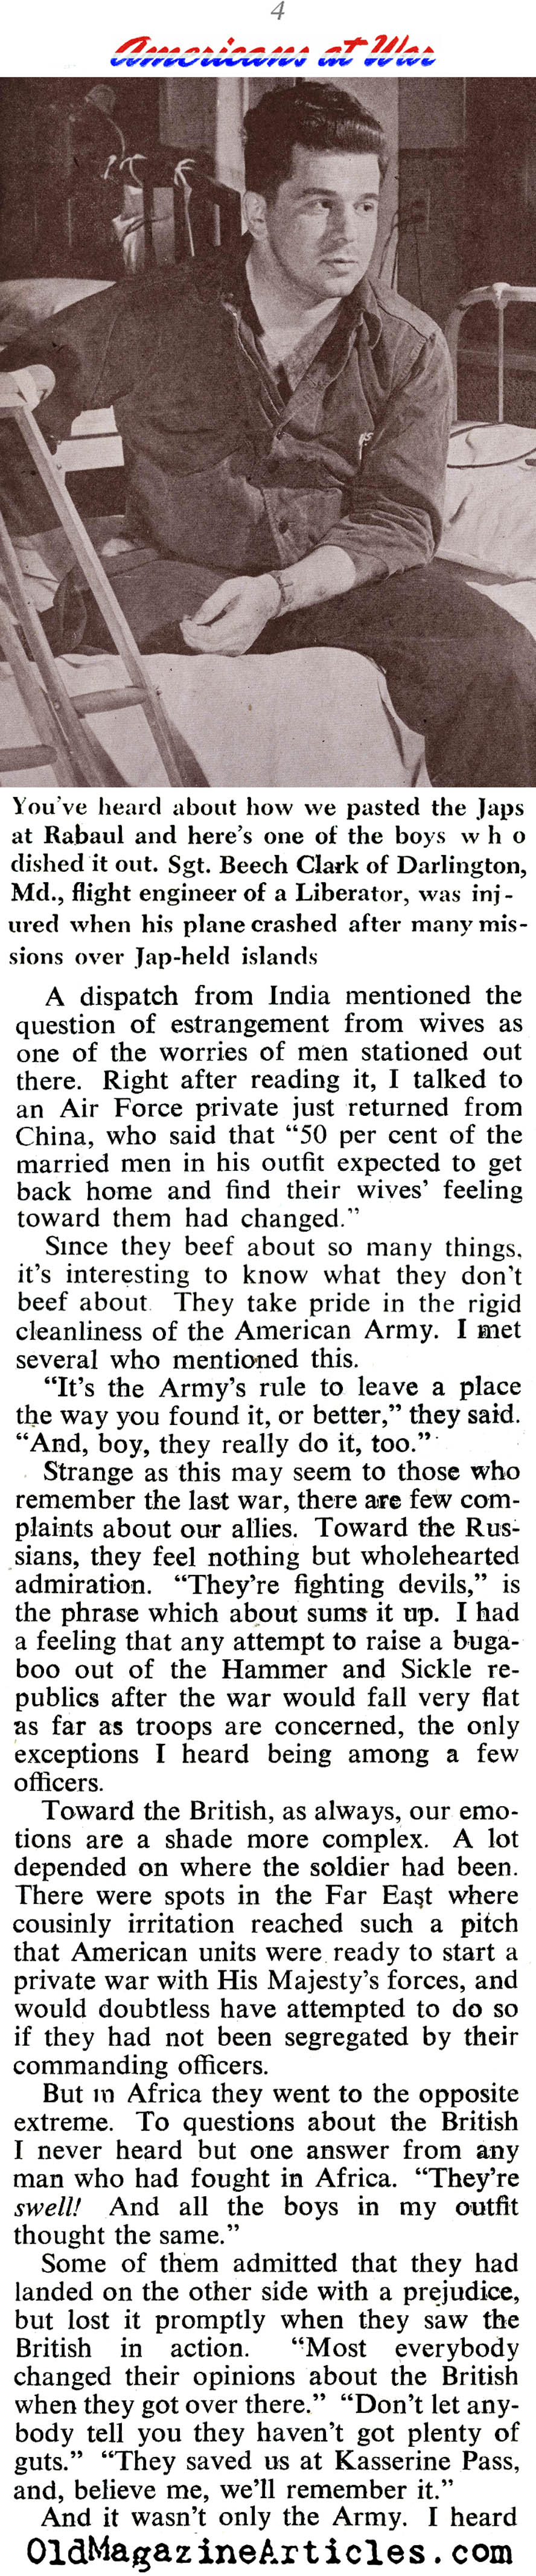 Soldiers Speak-Out About the Home Front (Collier's Magazine, 1943)